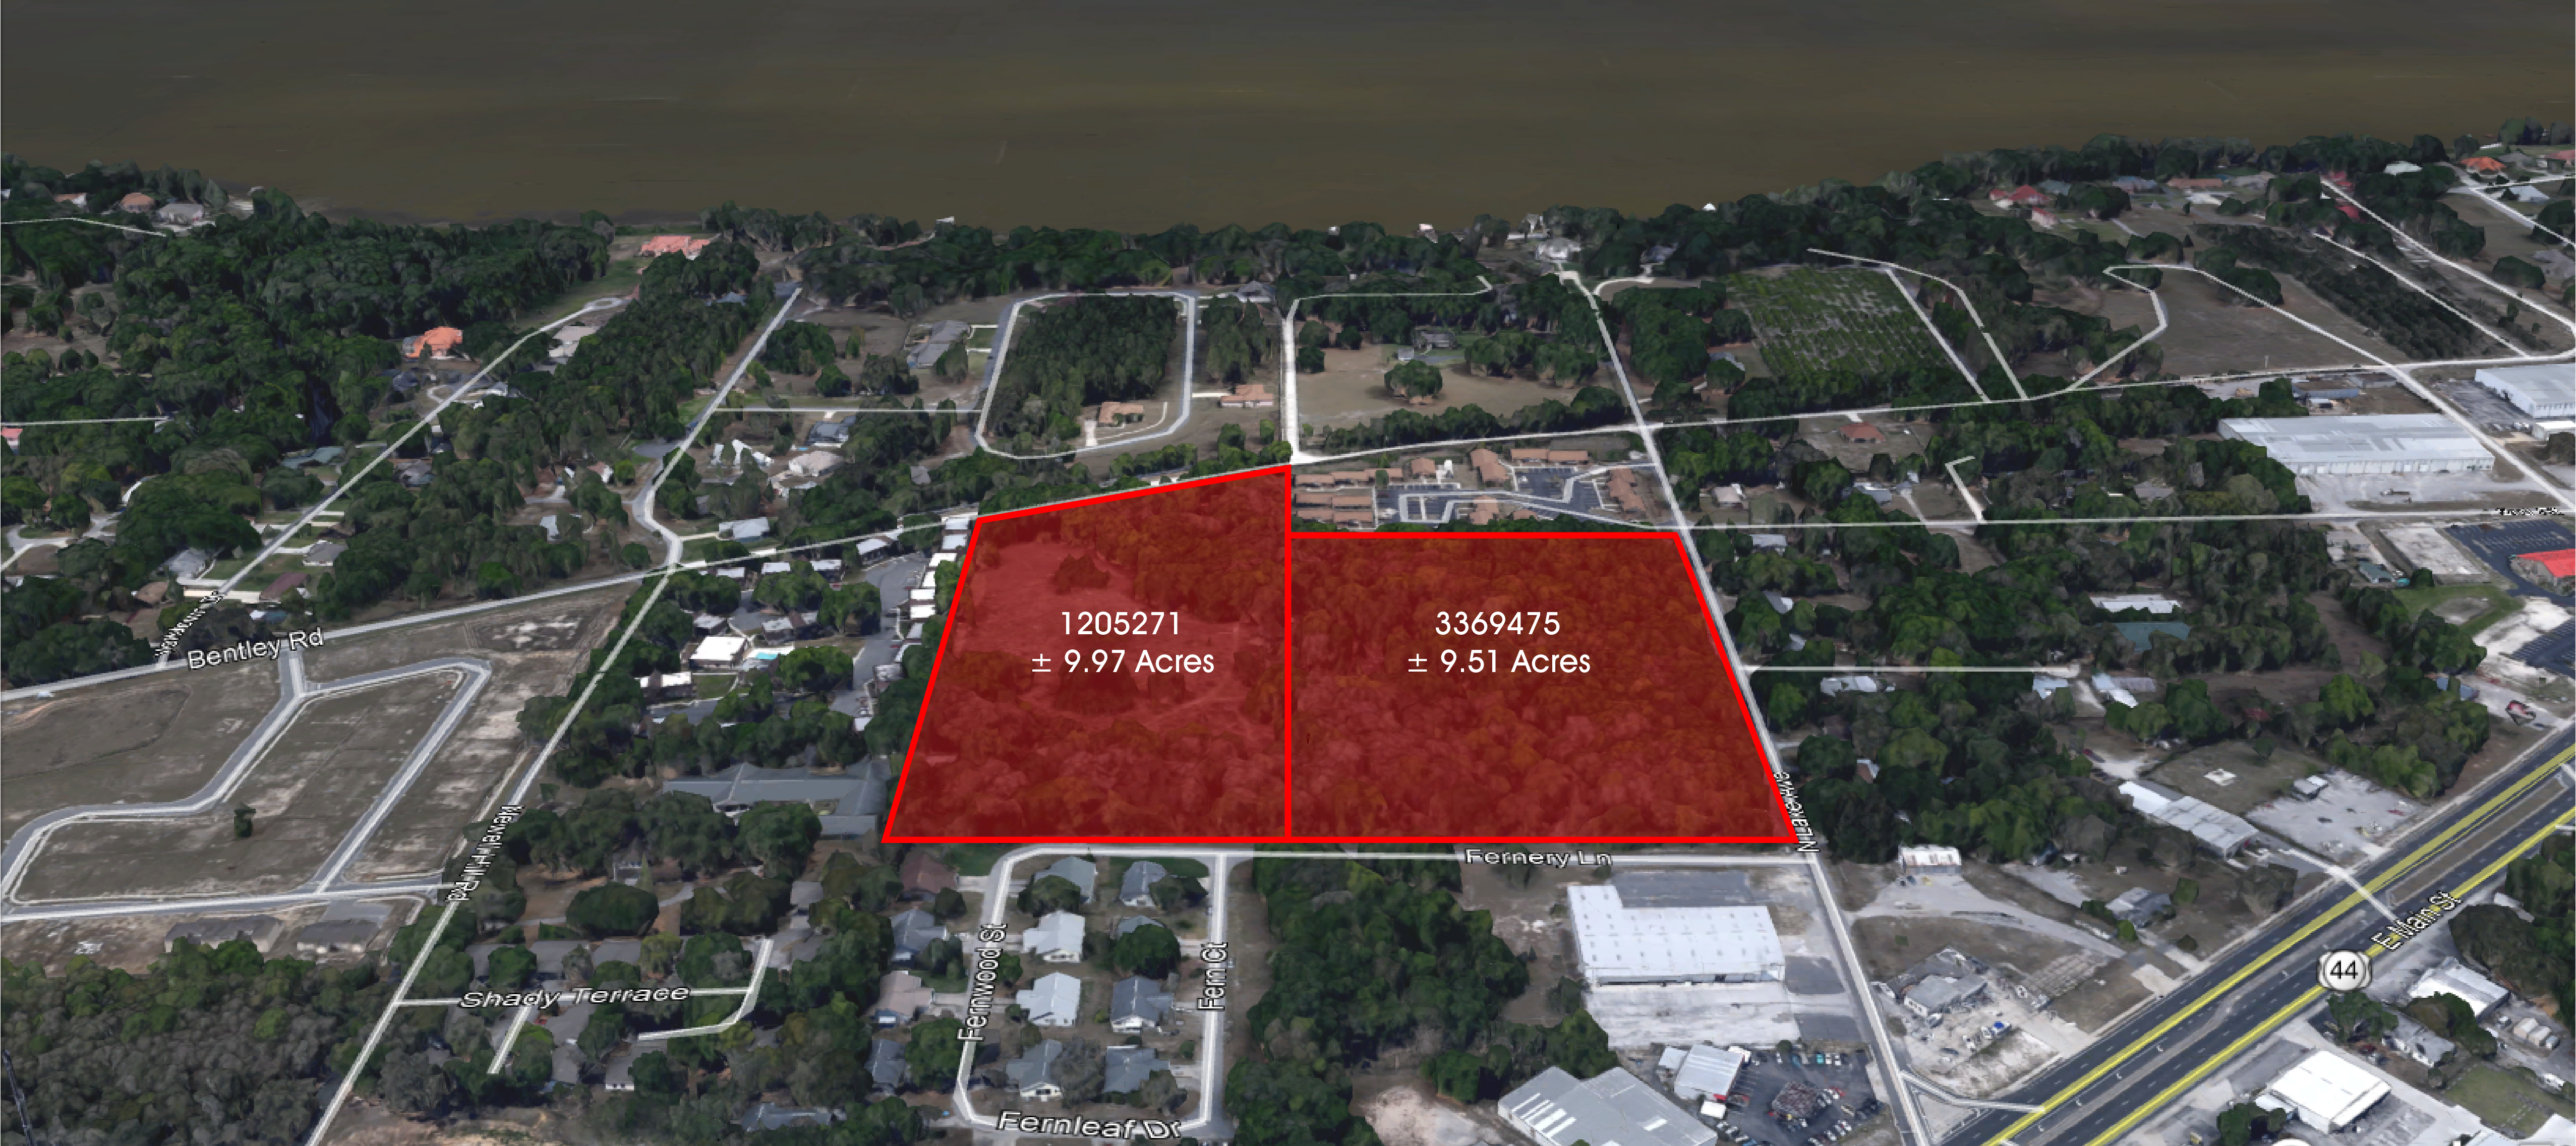 Image of the Leesburg Land, that McGill, Scott sold.